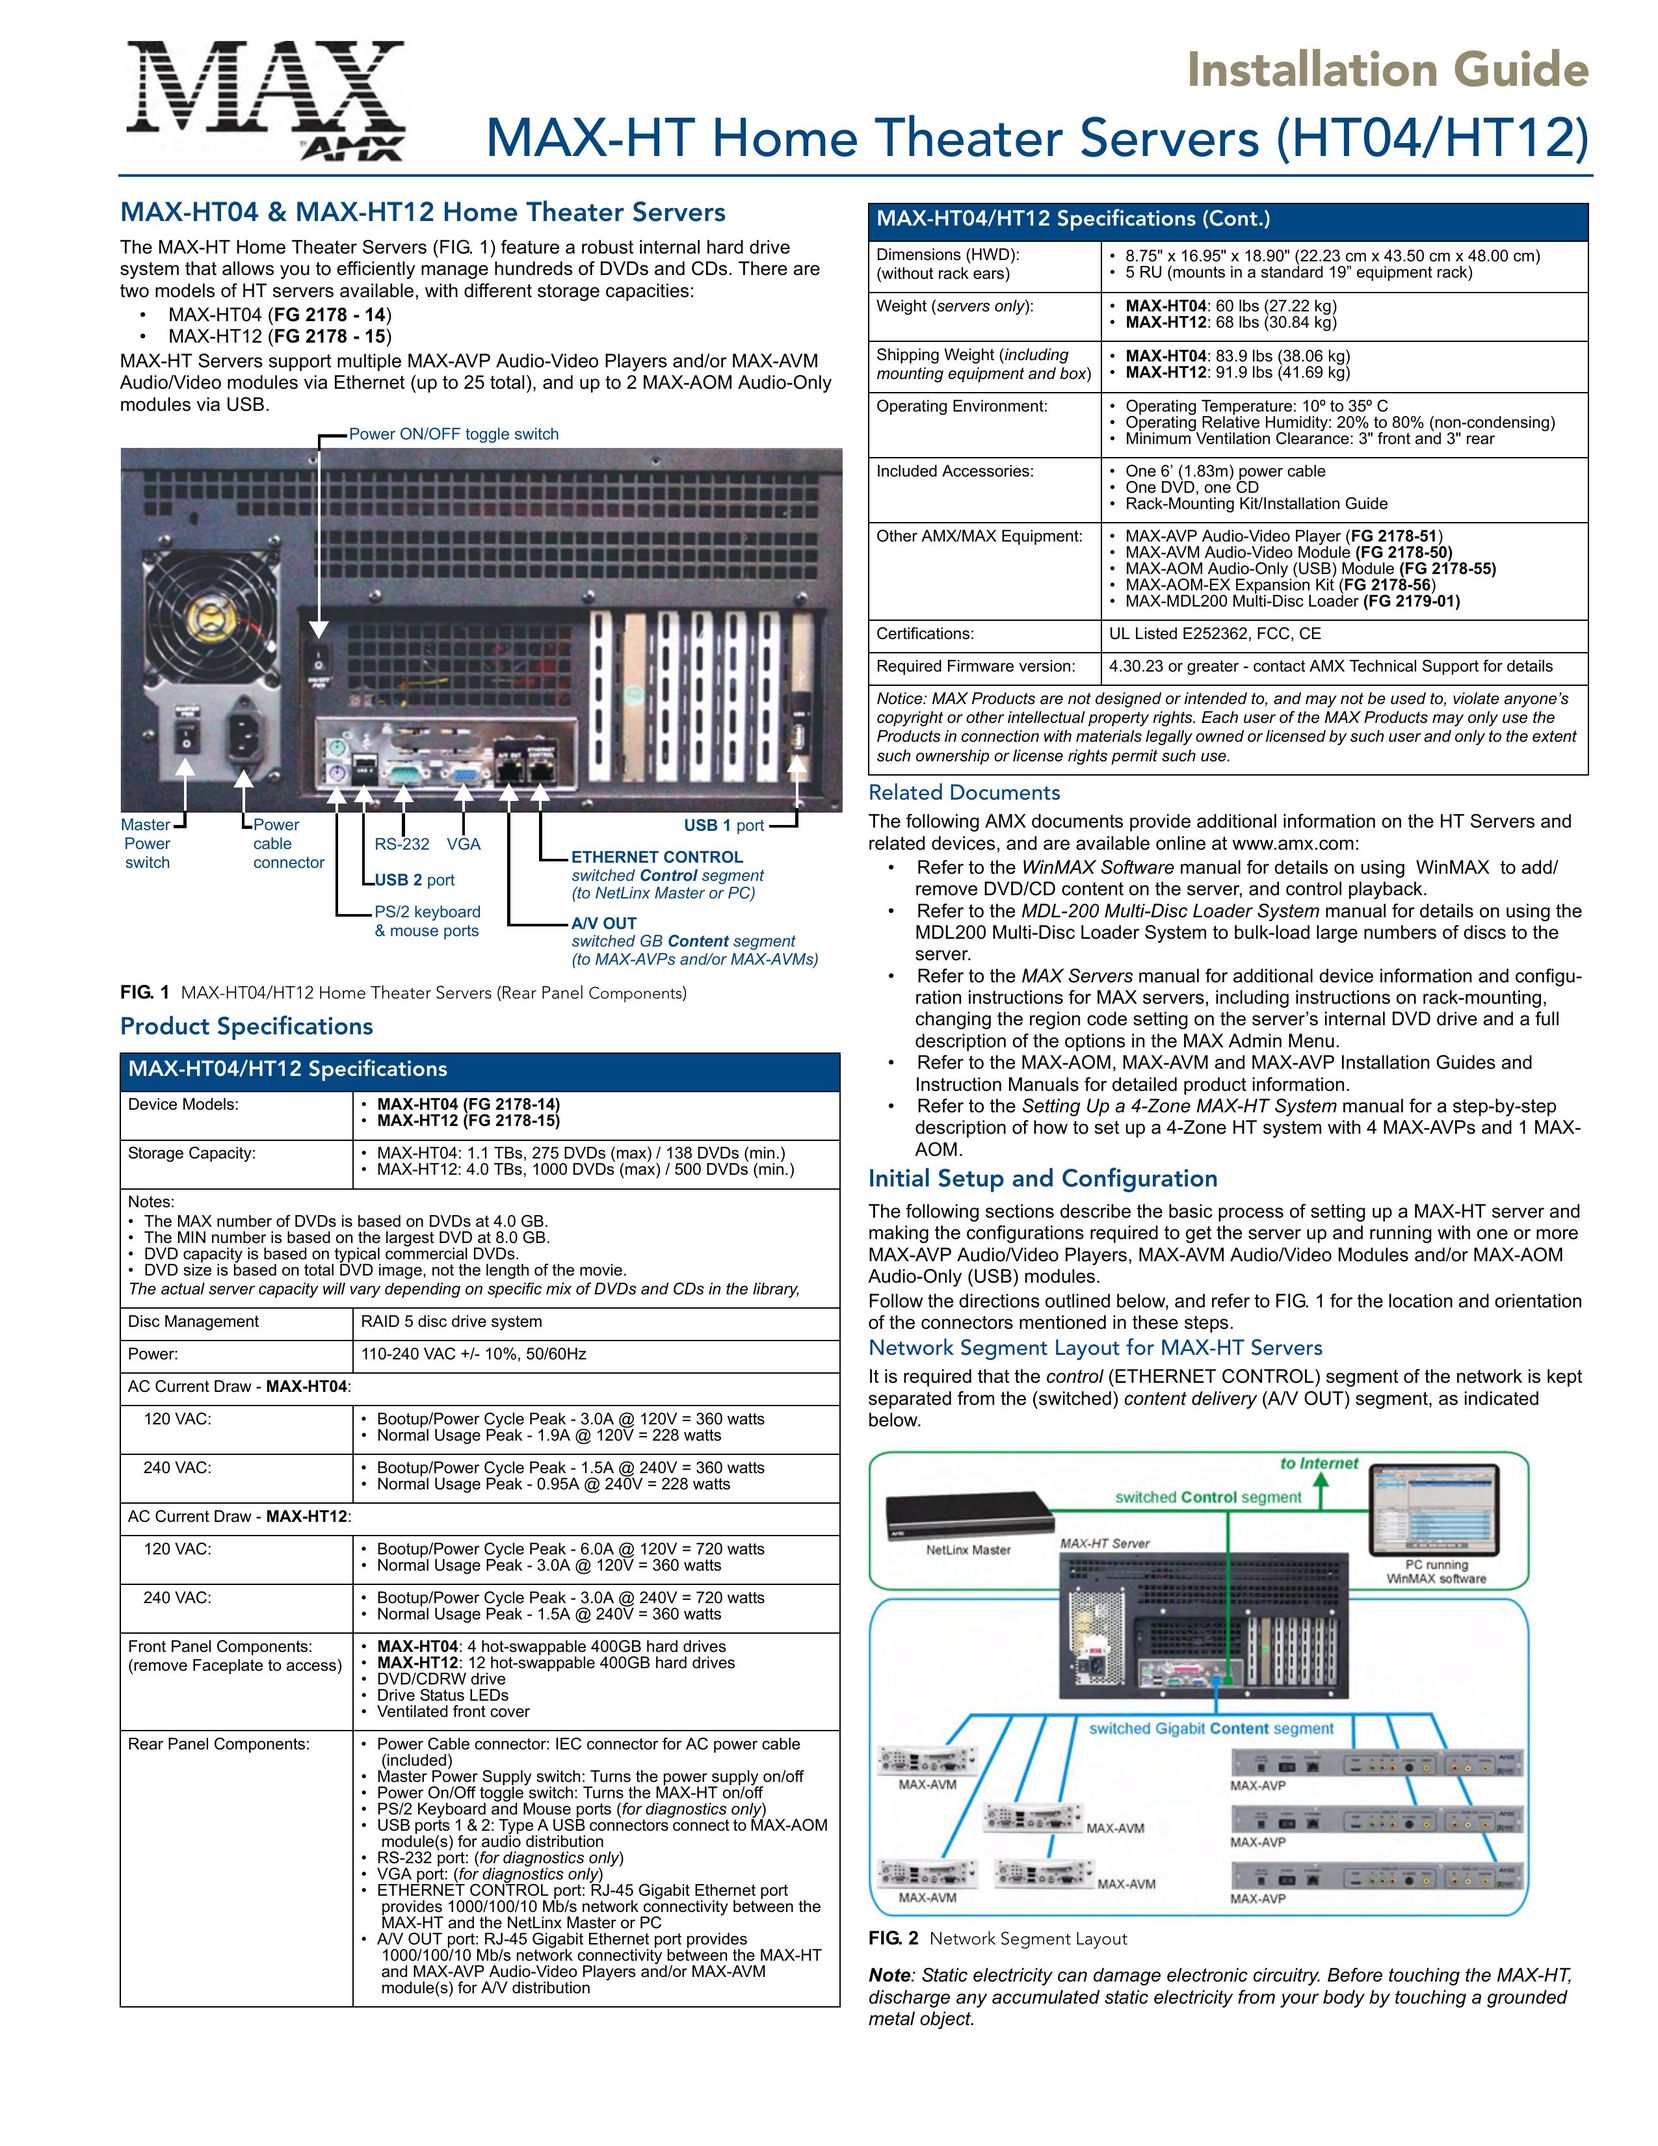 AMX HT04 Home Theater Server User Manual